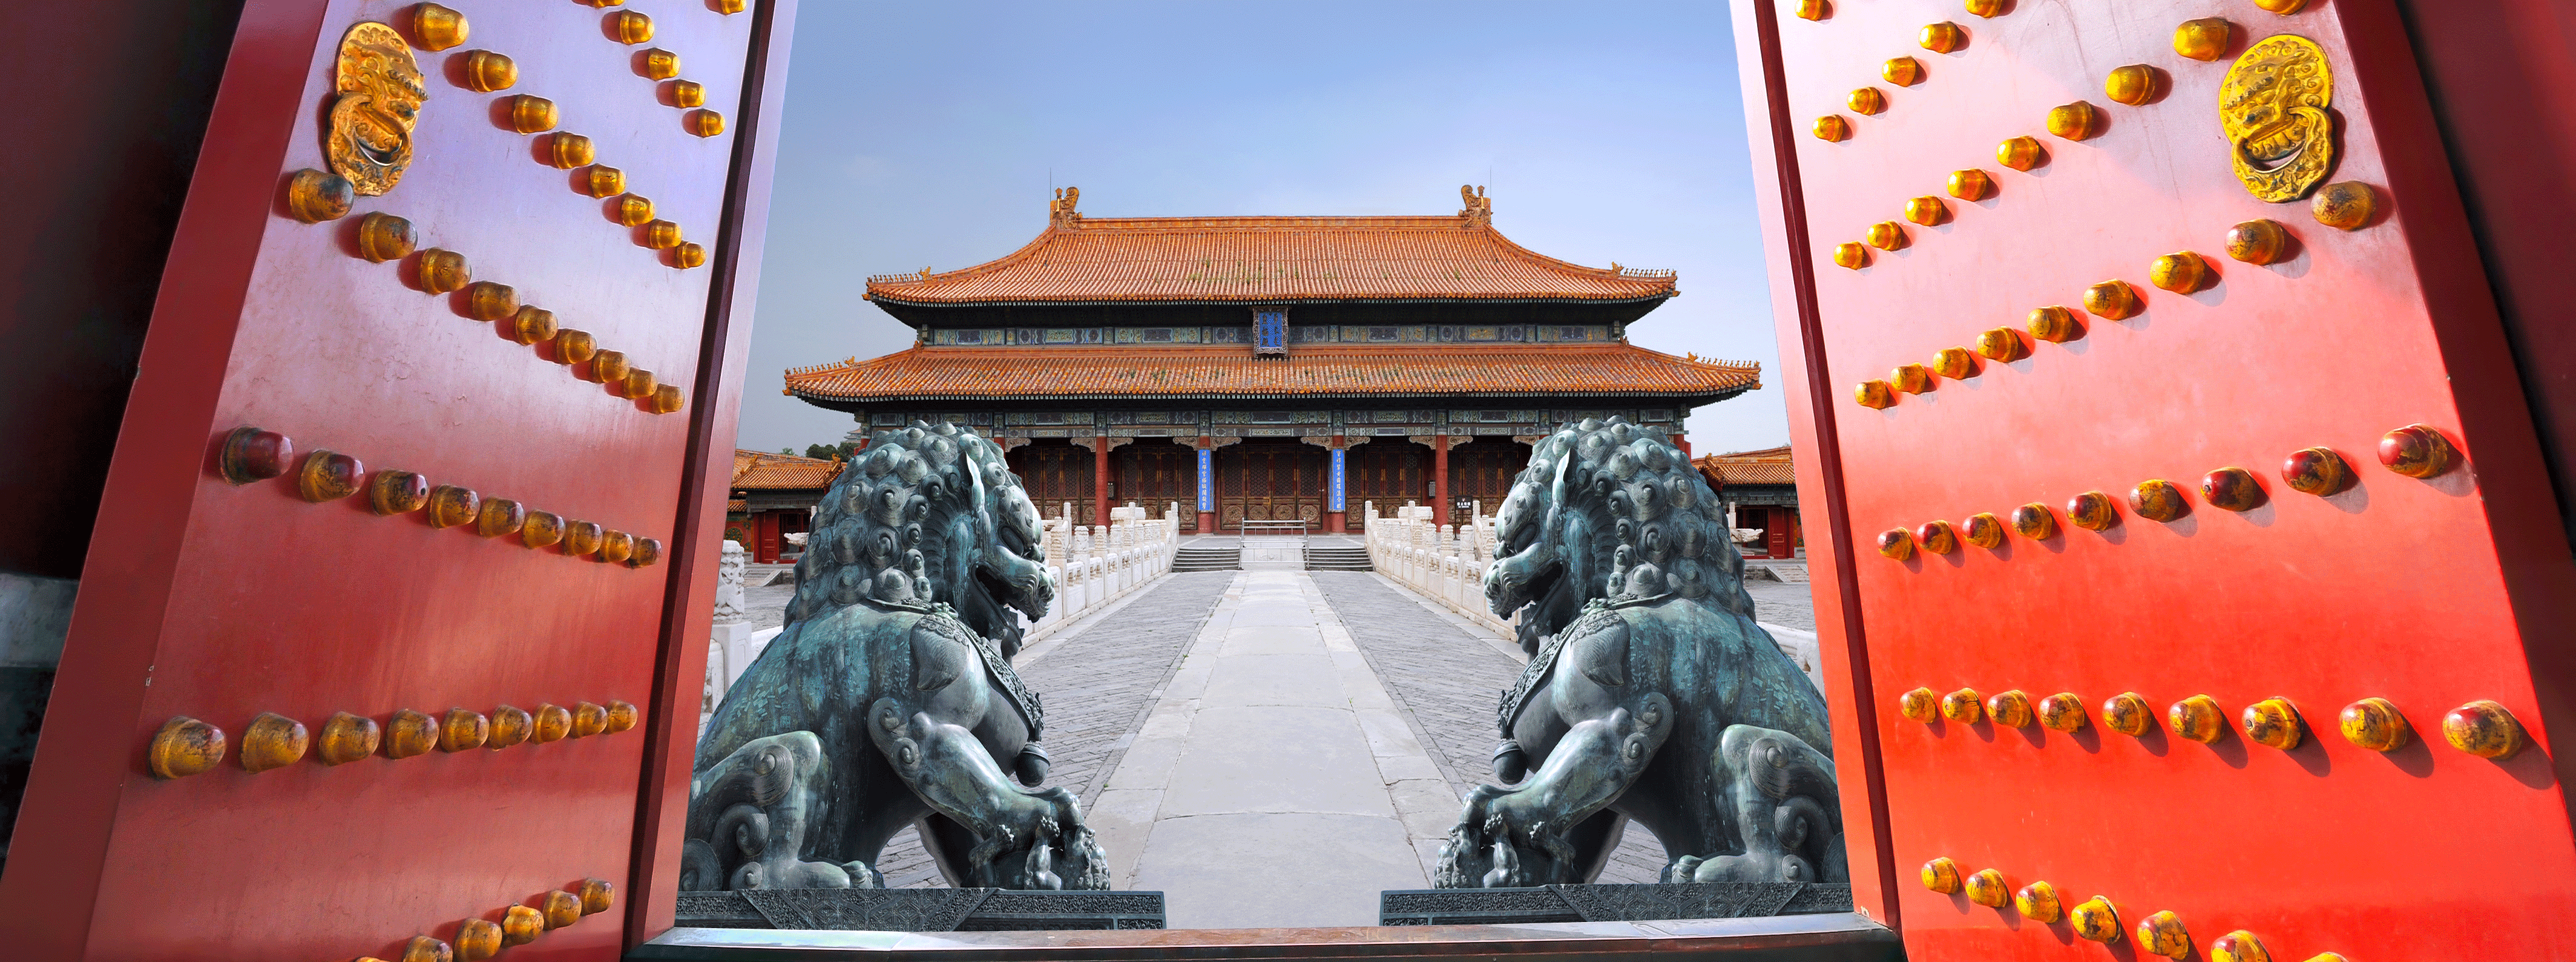 /resource///Images/china/headerimage/Red-entrance-gate-opening-to-the-forbidden-city_1.png